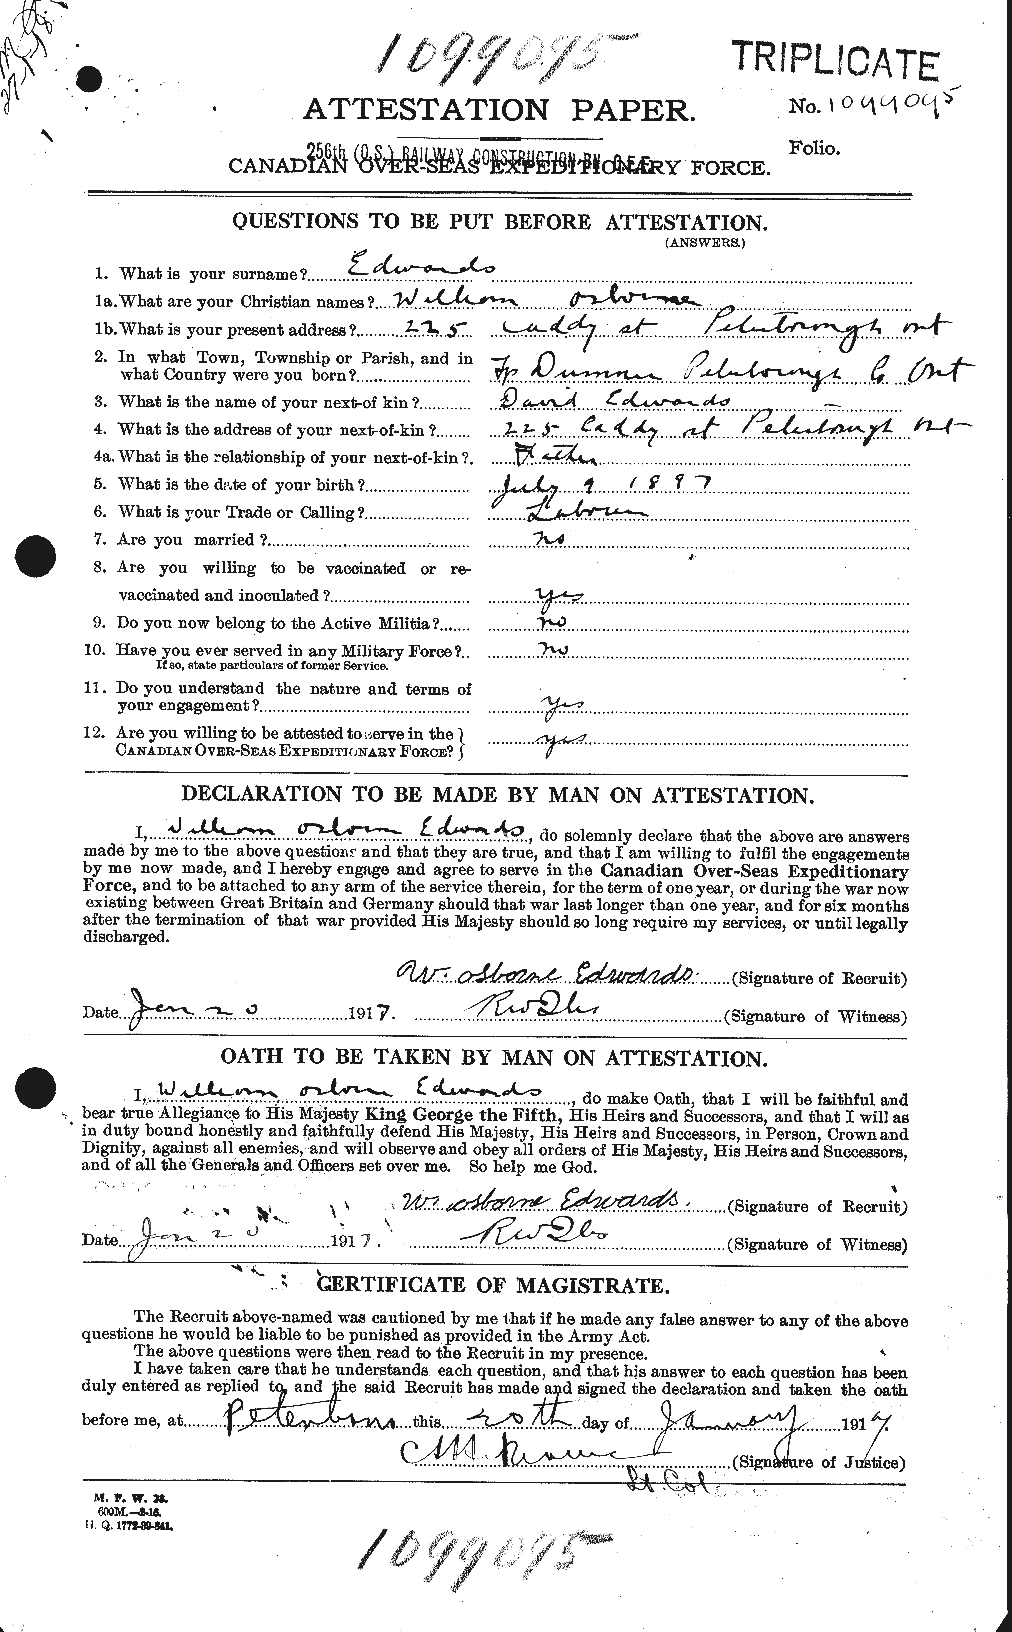 Personnel Records of the First World War - CEF 311935a